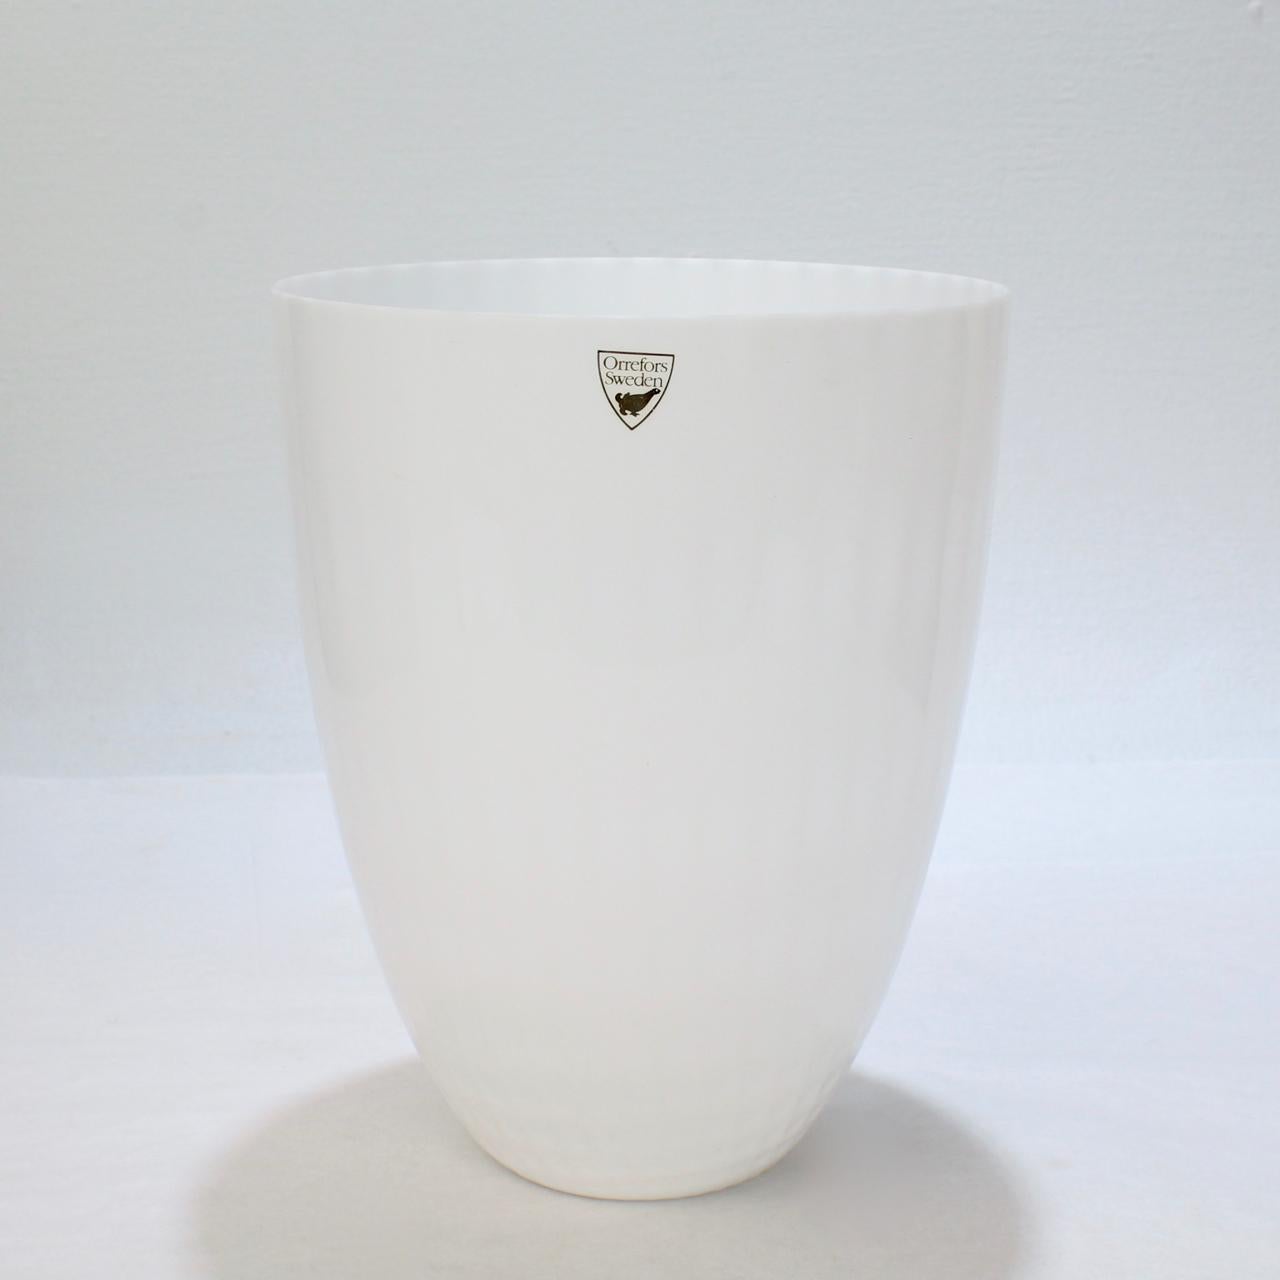 A fine art glass vase by Orrefors. 

Entitled Snöljus or Snowlight.

Designed by Ingegerd Råman.

Together with its Orrefors box.

Bearing an etched signature to the base: Orrefors.

Date:
Late 20th Century

Overall Condition.
It is in overall very